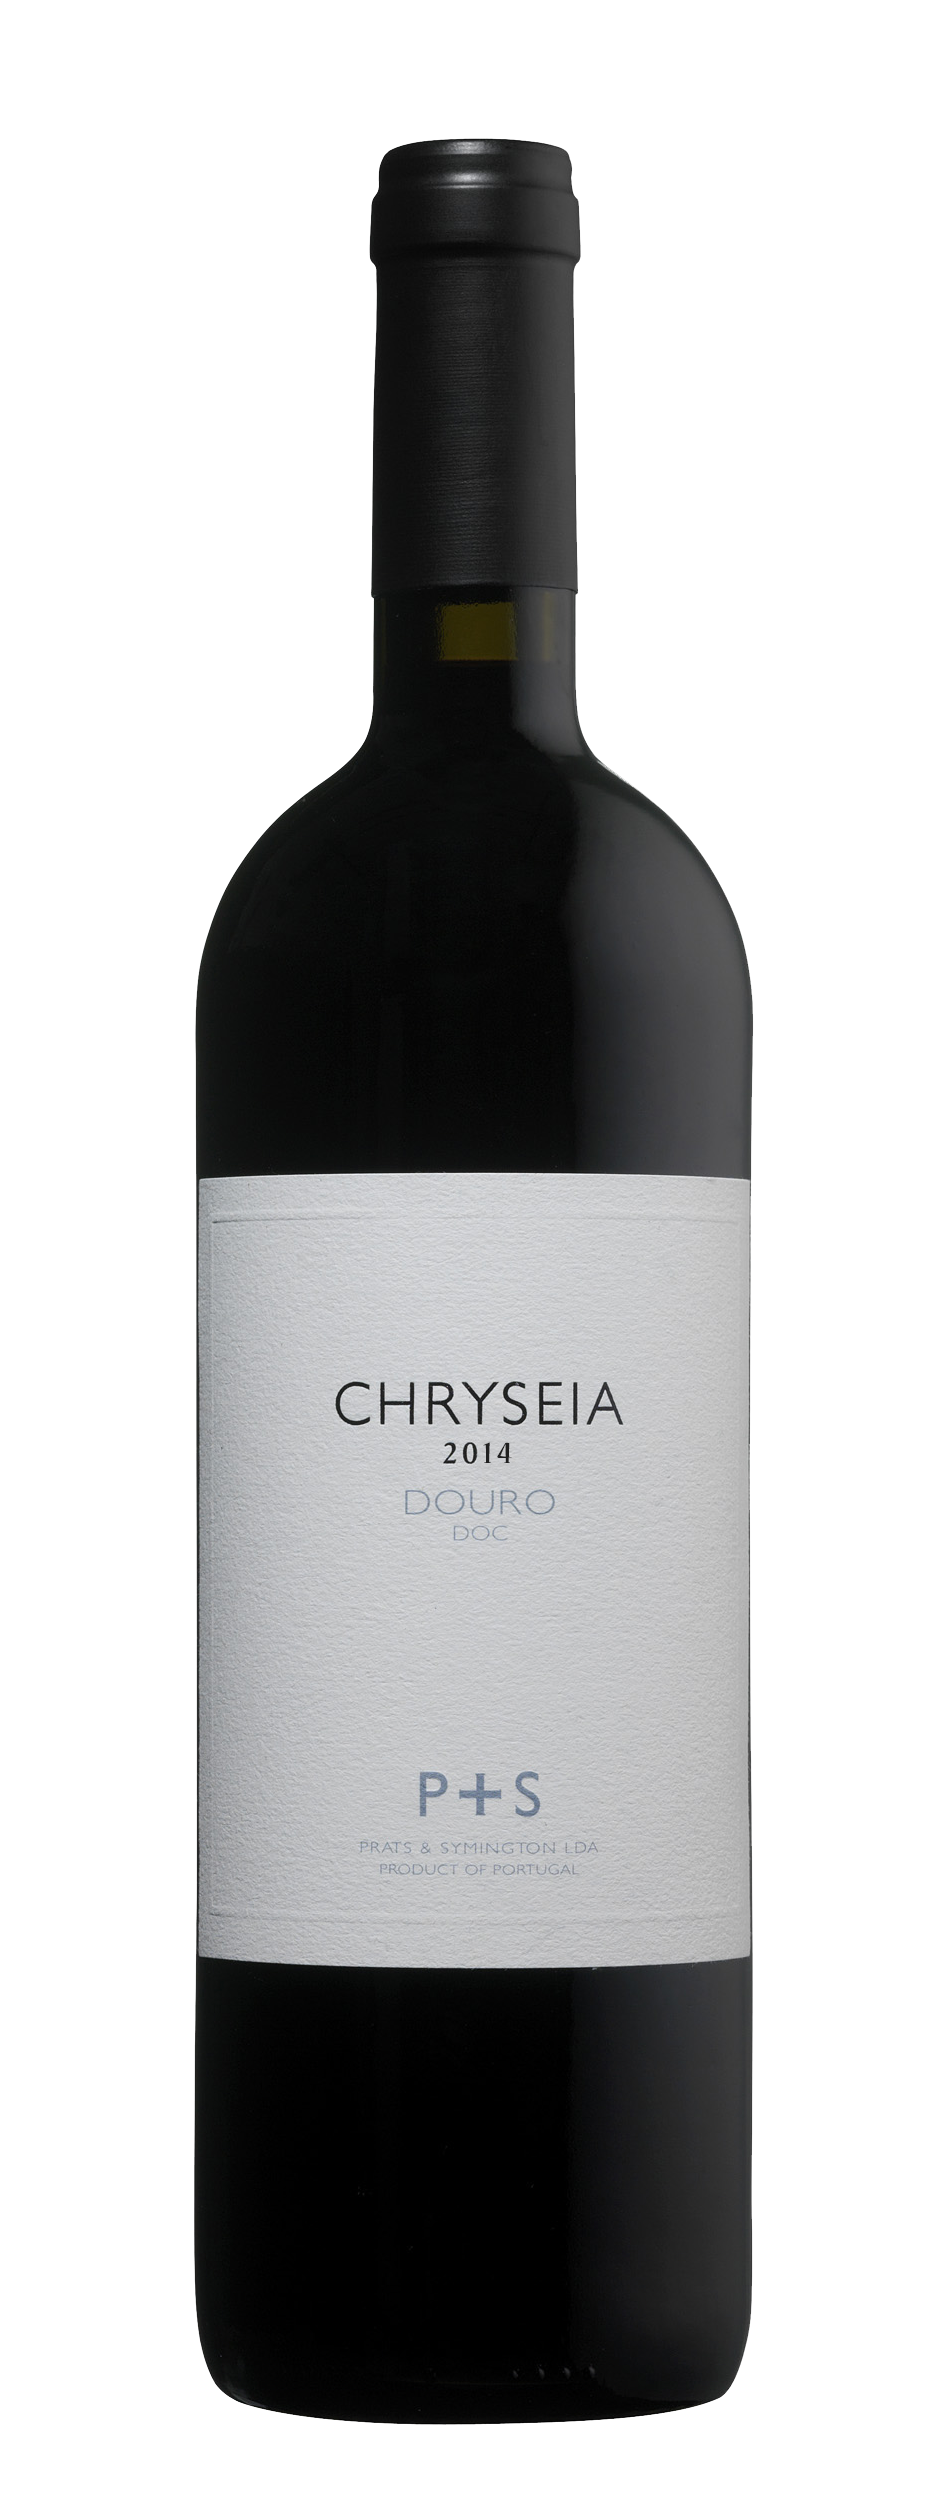 Product Image for P&S CHRYSEIA DOURO RED 2014